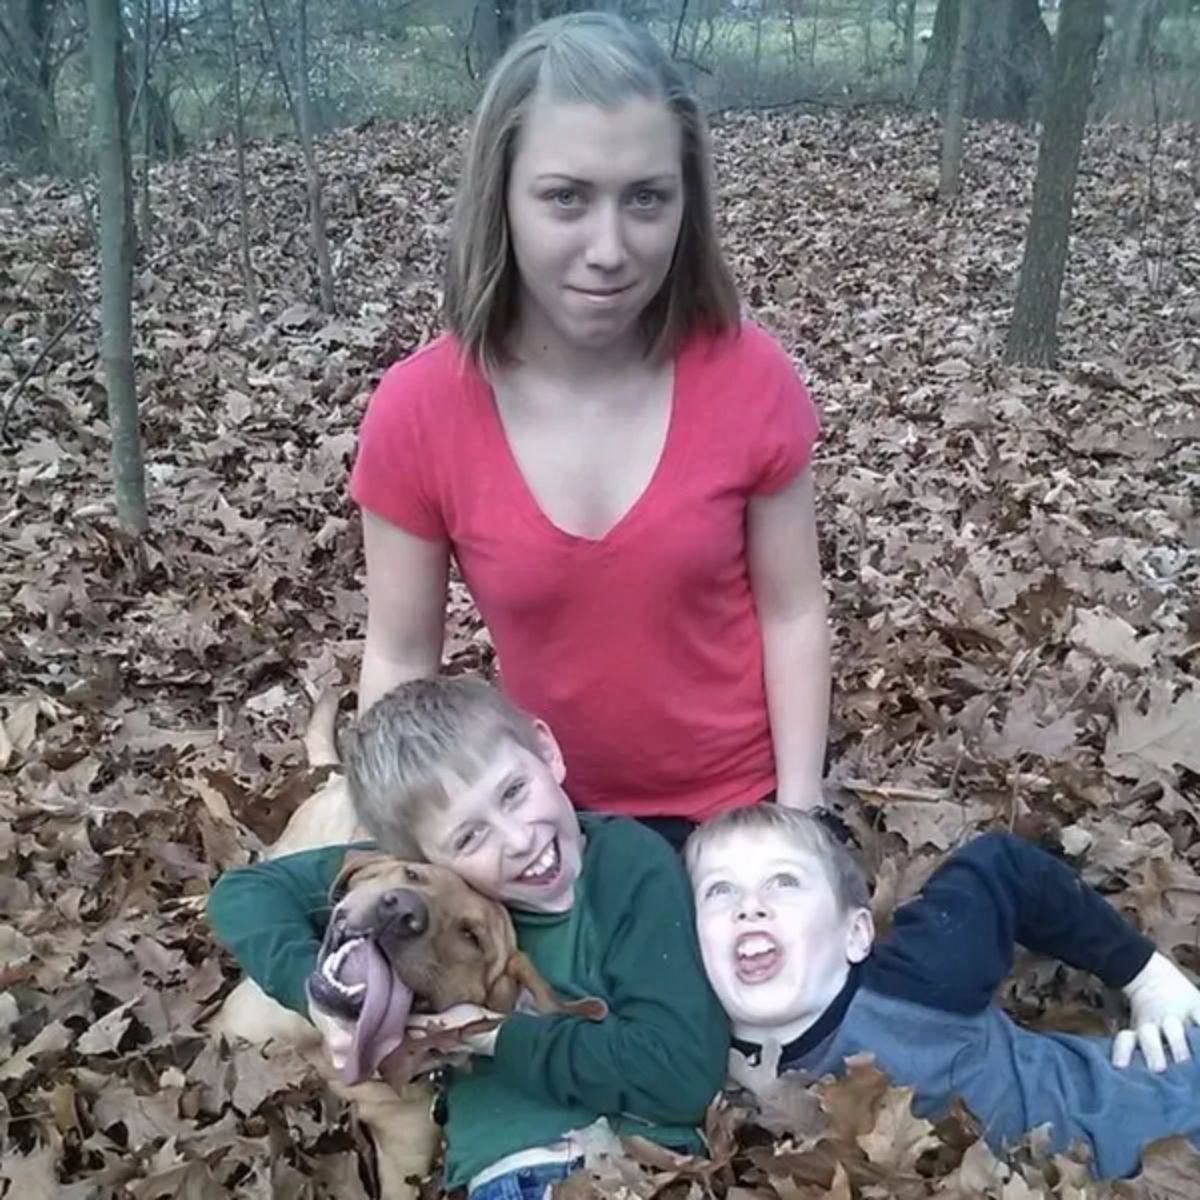 a woman sitting in a forest with brown leaves covering the ground with 2 boys and 1 boy holding a brown dog with the tongue hanging out